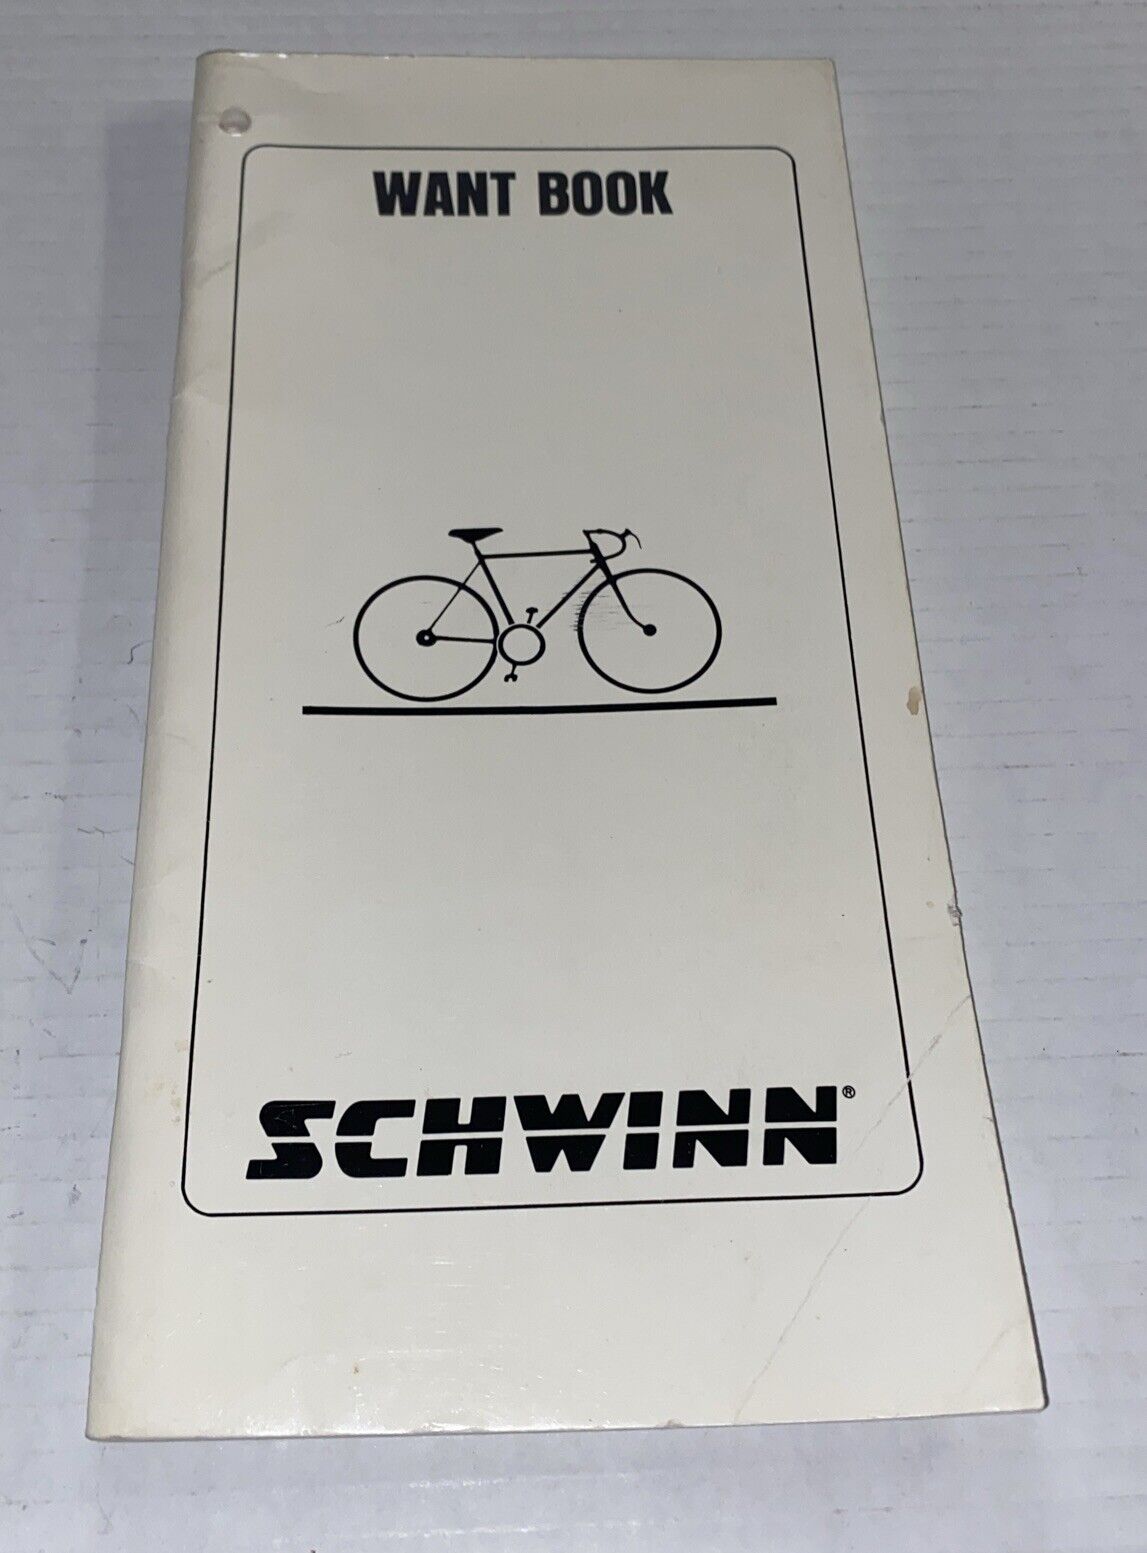 Schwinn Dealer Want Book Vintage  Book Many Blank Pages Bicycle Accessory Prop